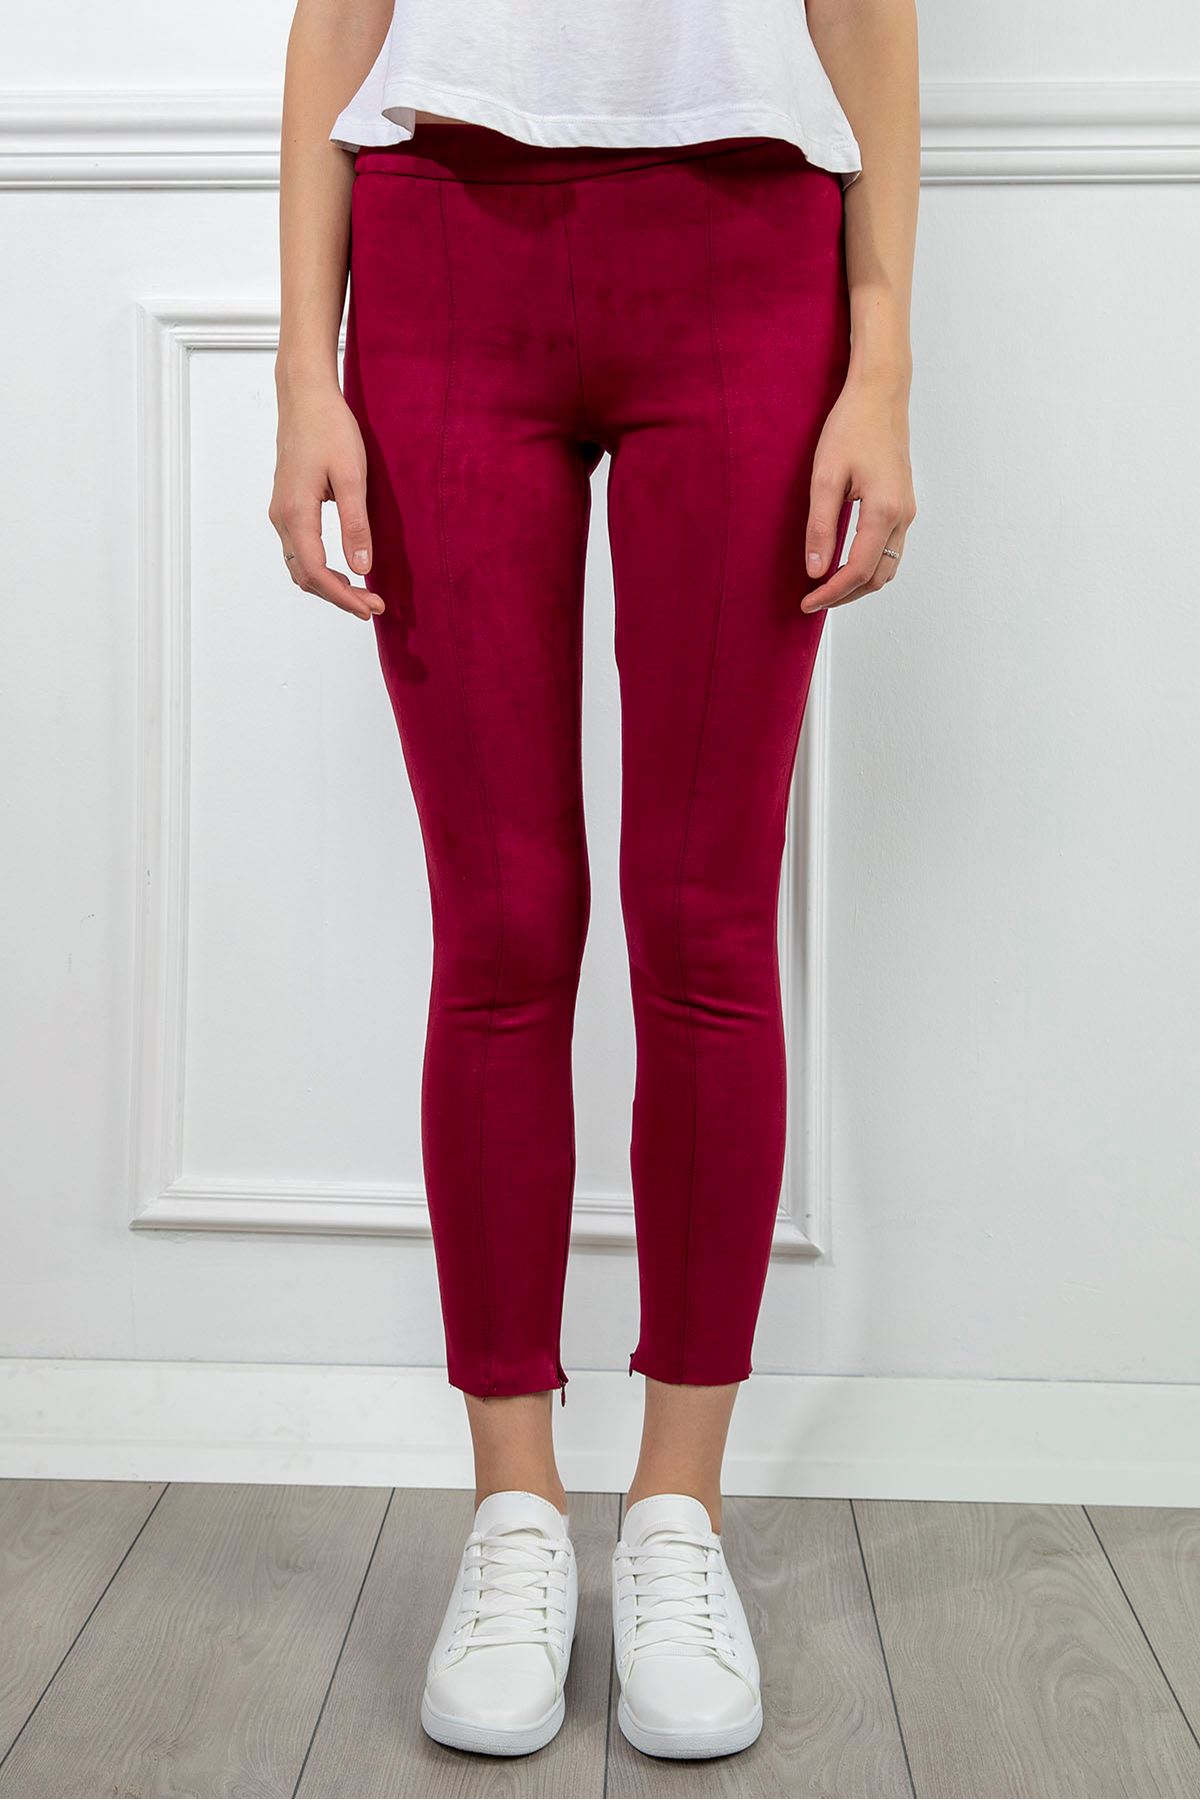 Suede Fabric Ankle Length Zip Women Tights - Burgundy